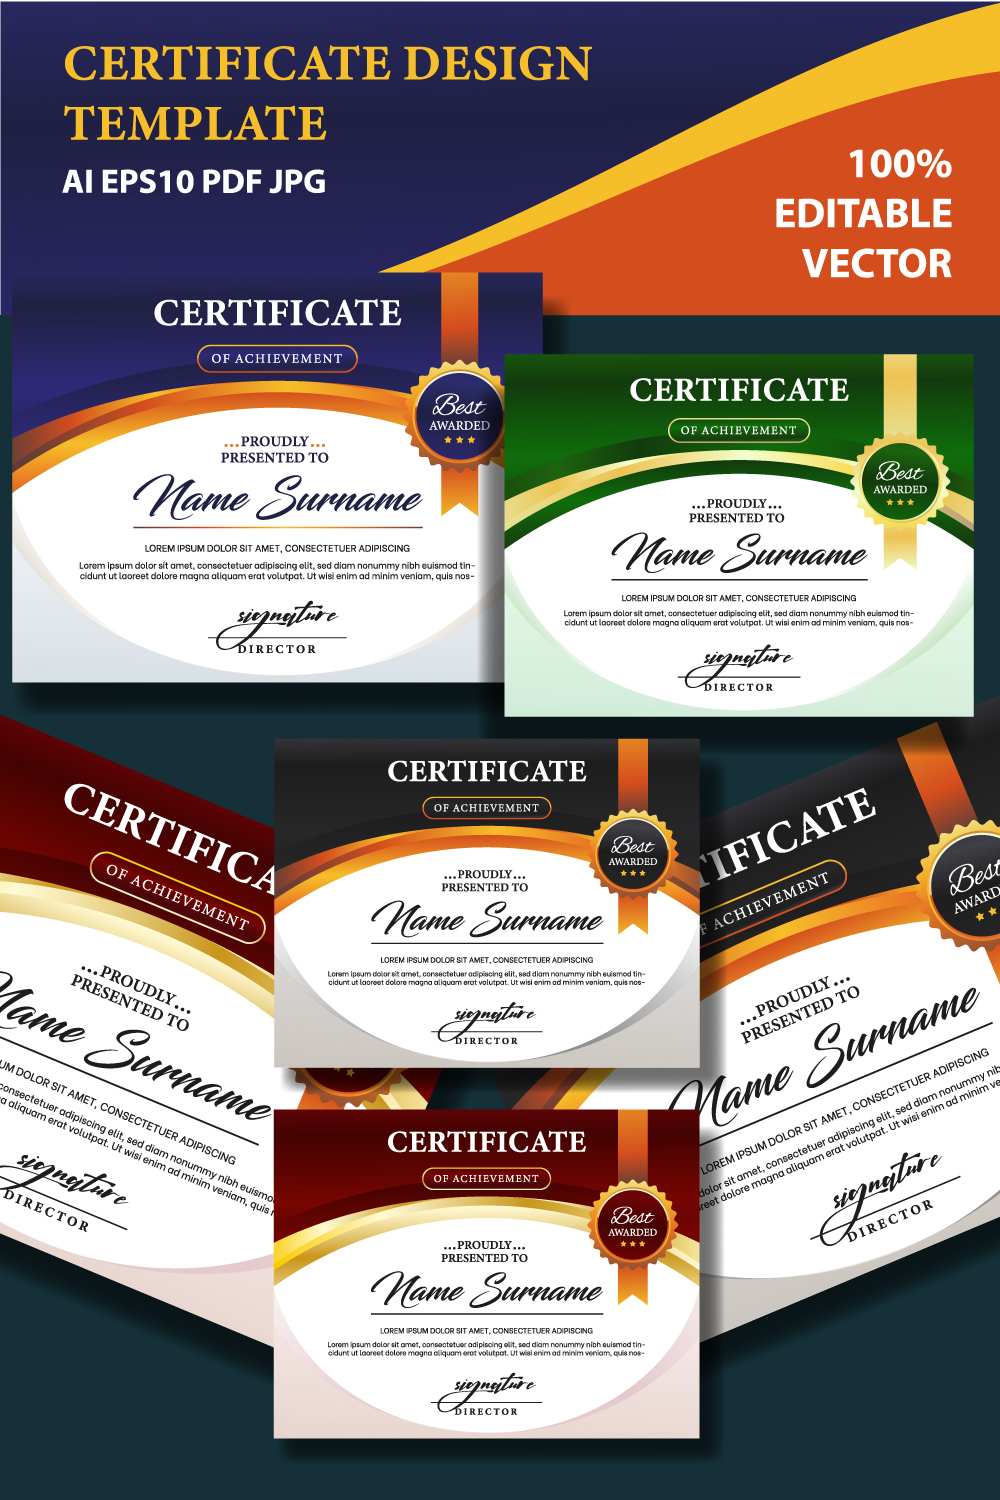 Modern and Luxurious Certificate Design pinterest image.